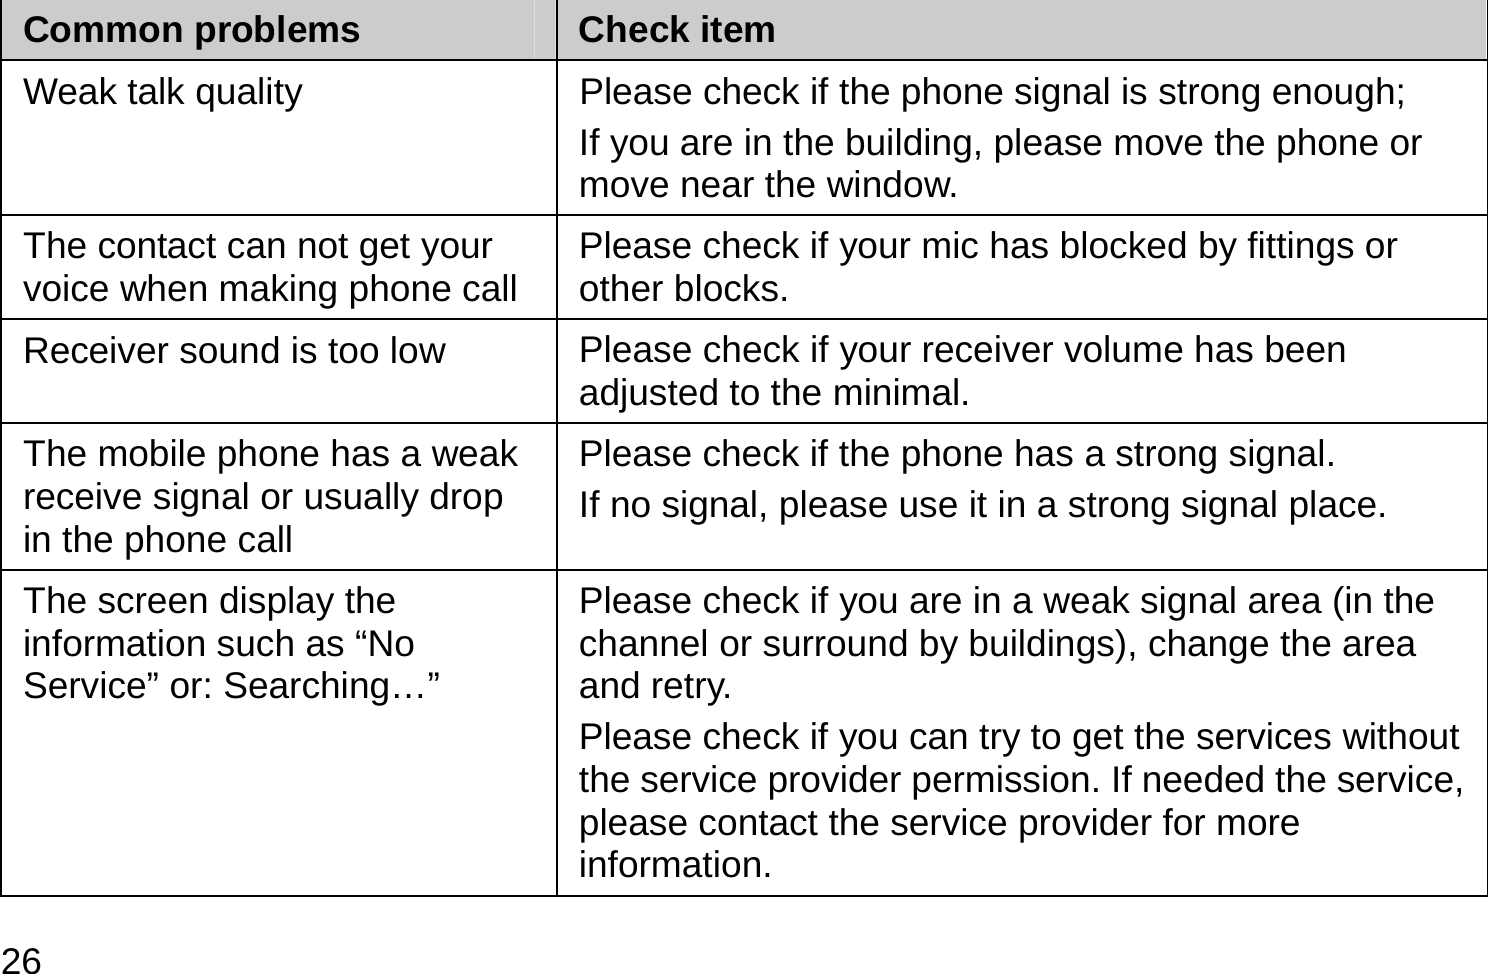  26 Common problems  Check item Weak talk quality  Please check if the phone signal is strong enough;   If you are in the building, please move the phone or move near the window.   The contact can not get your voice when making phone call  Please check if your mic has blocked by fittings or other blocks.   Receiver sound is too low  Please check if your receiver volume has been adjusted to the minimal.   The mobile phone has a weak receive signal or usually drop in the phone call Please check if the phone has a strong signal.   If no signal, please use it in a strong signal place. The screen display the information such as “No Service” or: Searching…”  Please check if you are in a weak signal area (in the channel or surround by buildings), change the area and retry. Please check if you can try to get the services without the service provider permission. If needed the service, please contact the service provider for more information. 